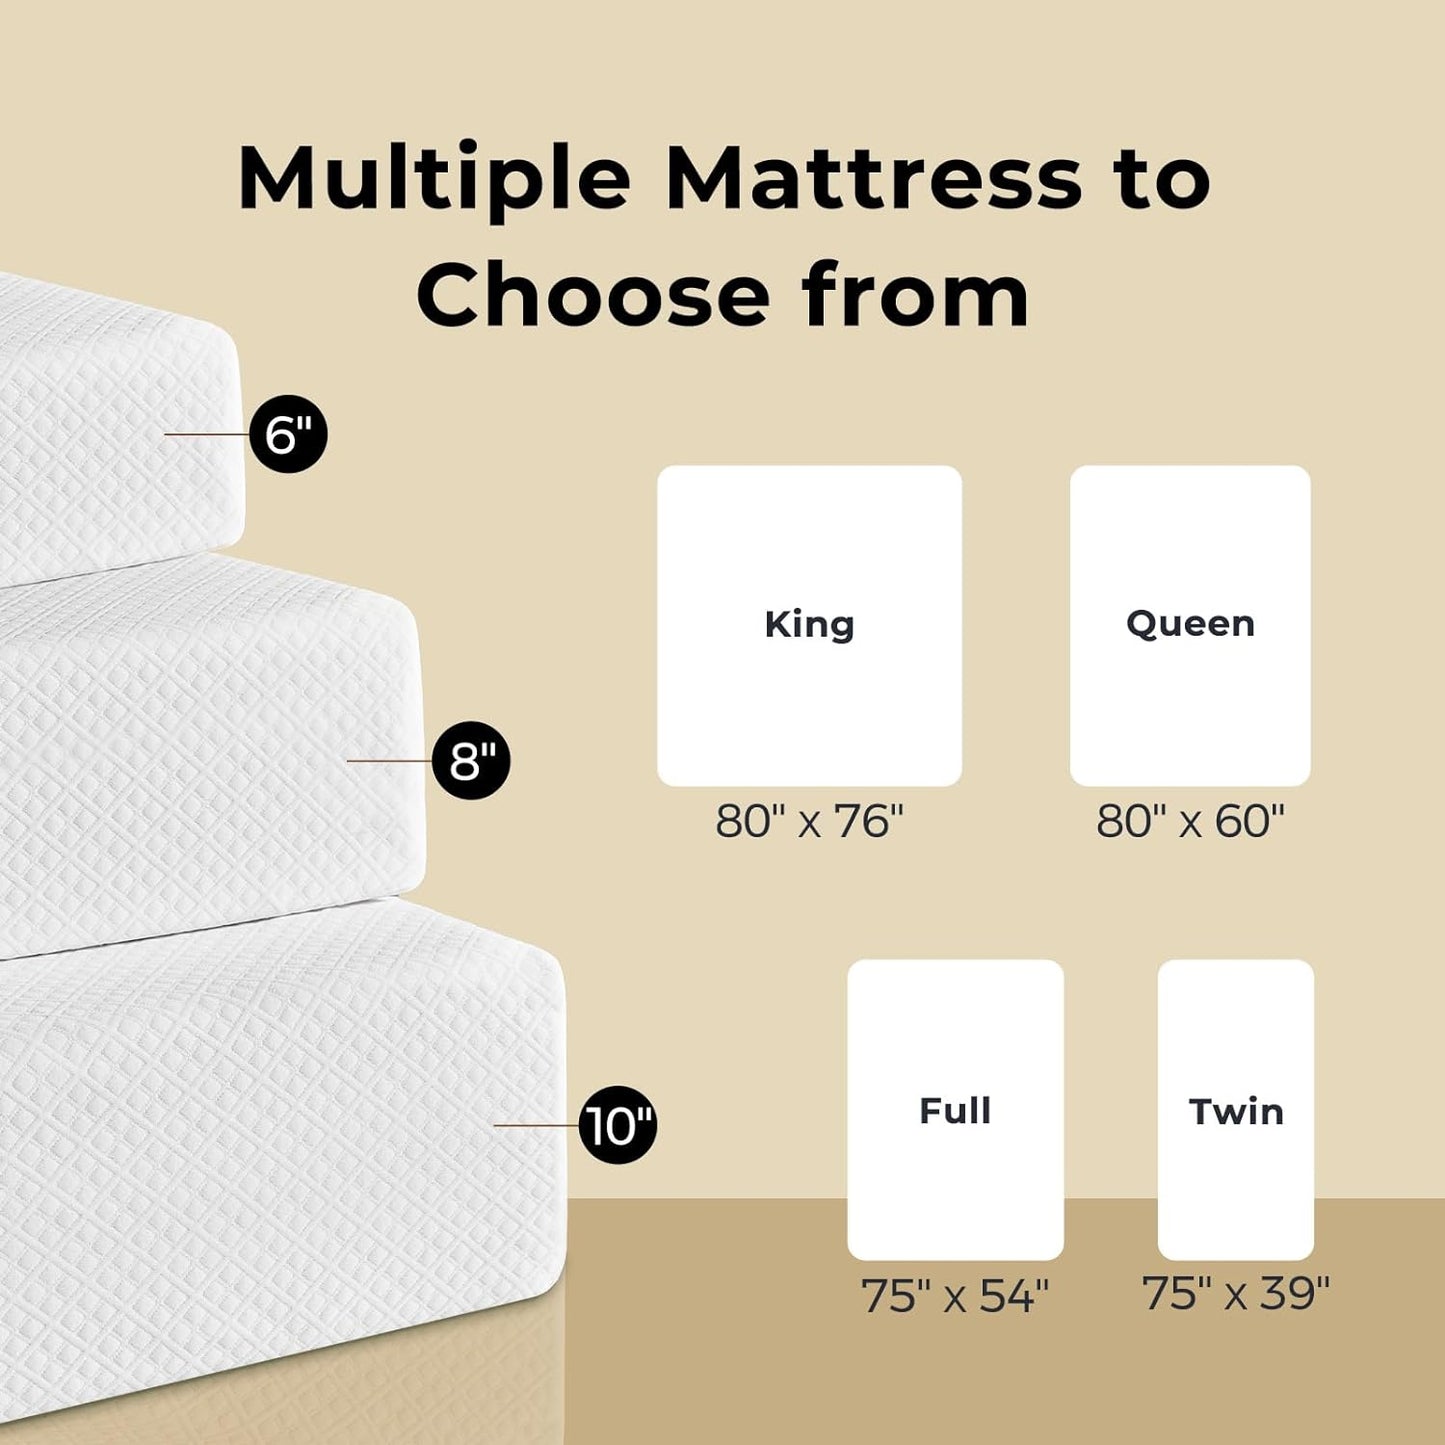 Full Mattress with Waterproof Mattress Protector, 10 Inch Gel Memory Foam in a Box, Fiberglass Free, Breathable for Cool Sleep & Comfy Support, Certipur-Us Certified, White